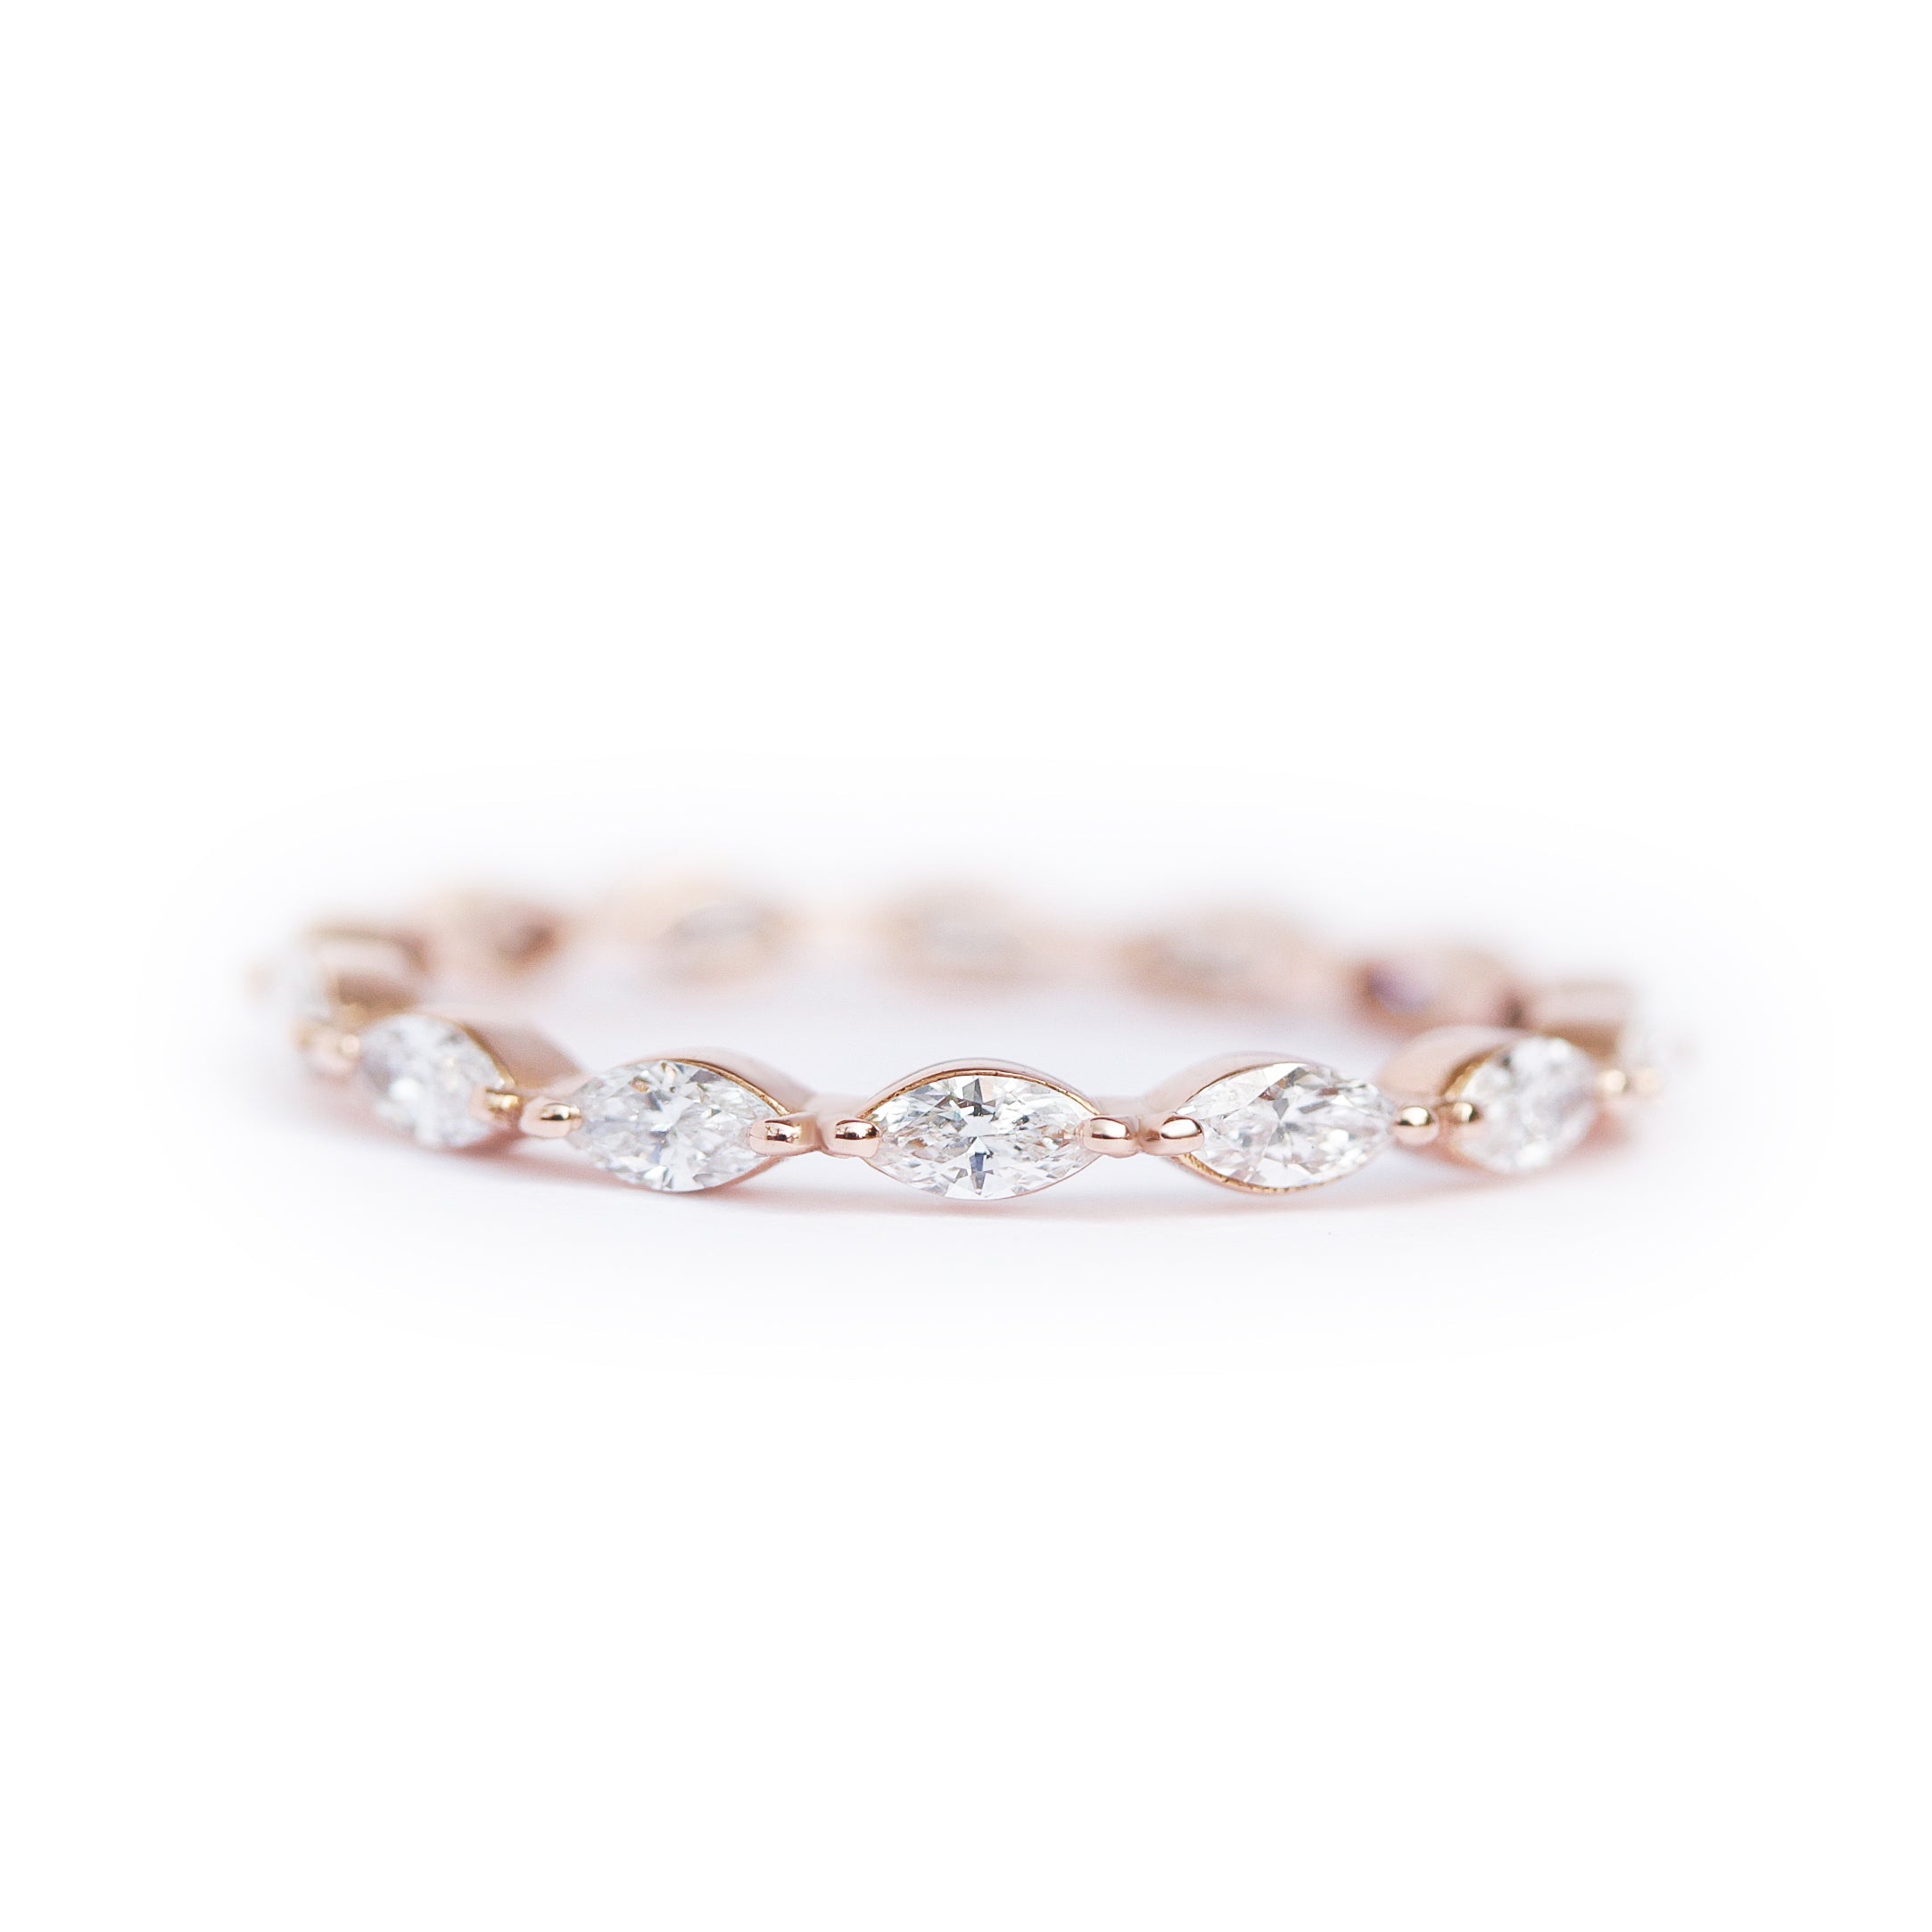 Delicate Marquise Diamond Eternity Ring - 14K, Rose Gold, READY TO SHIP! ♥